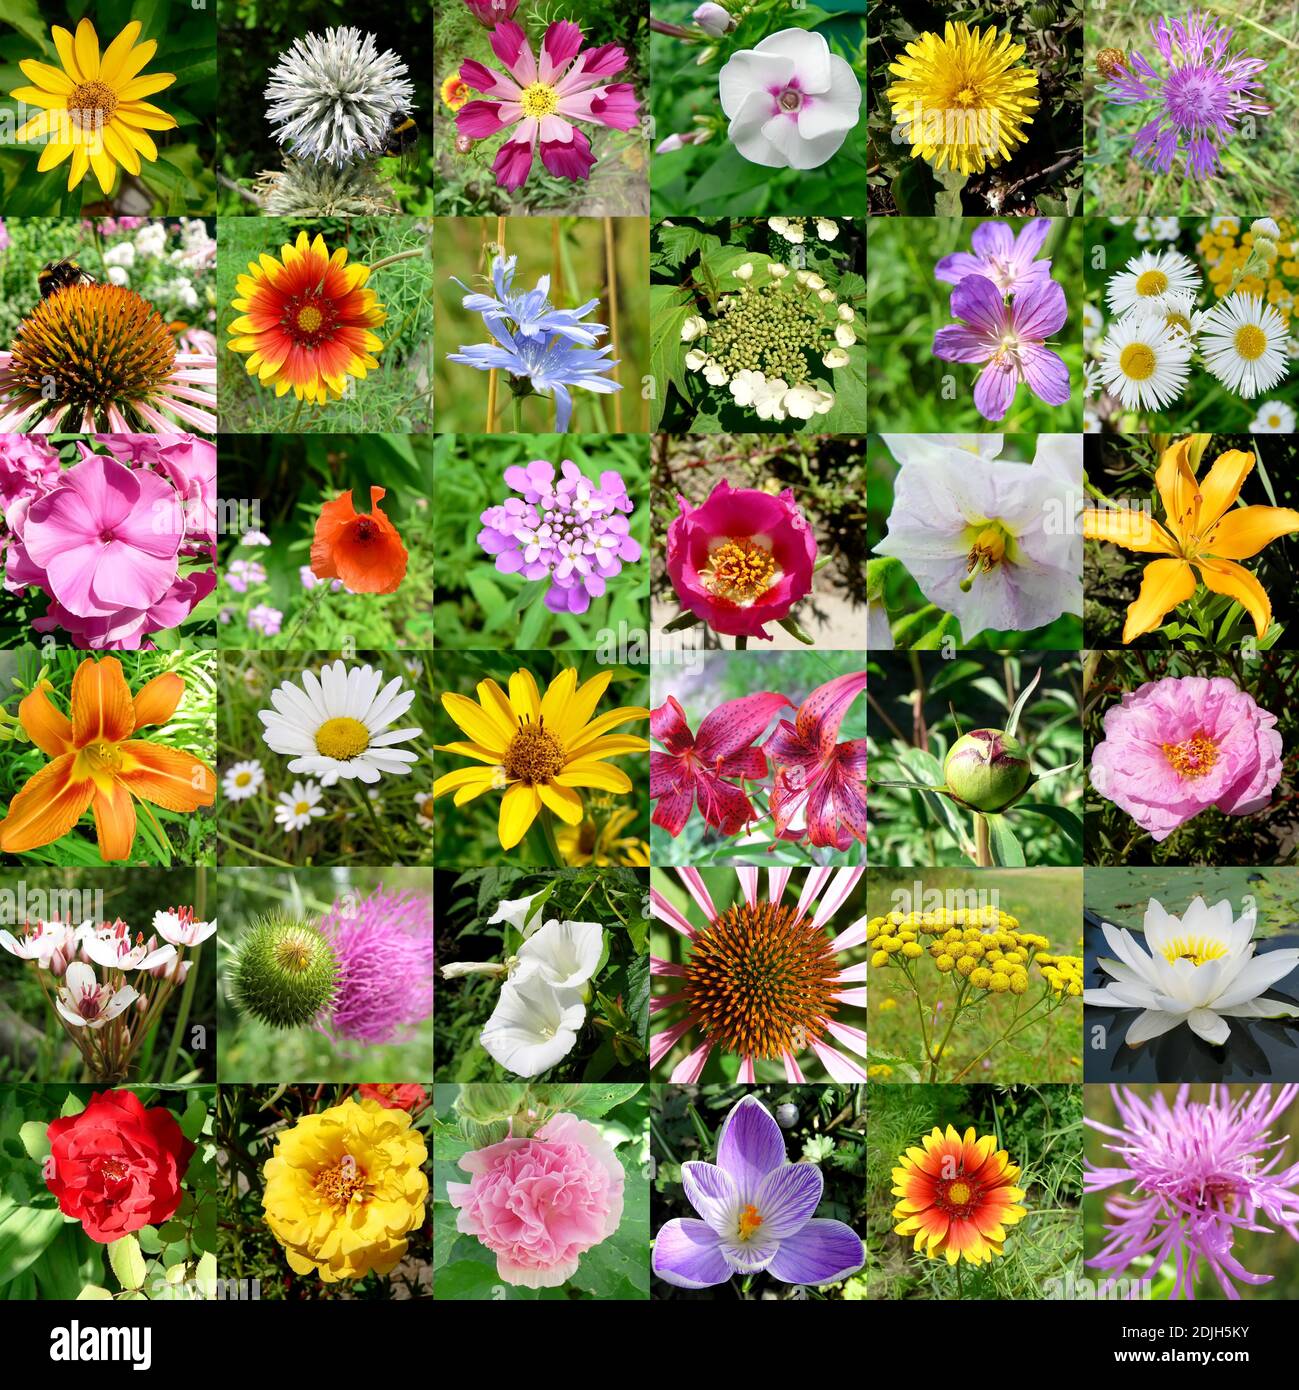 Collection of Amazing 4K Flower Images: Over 999 Different Varieties